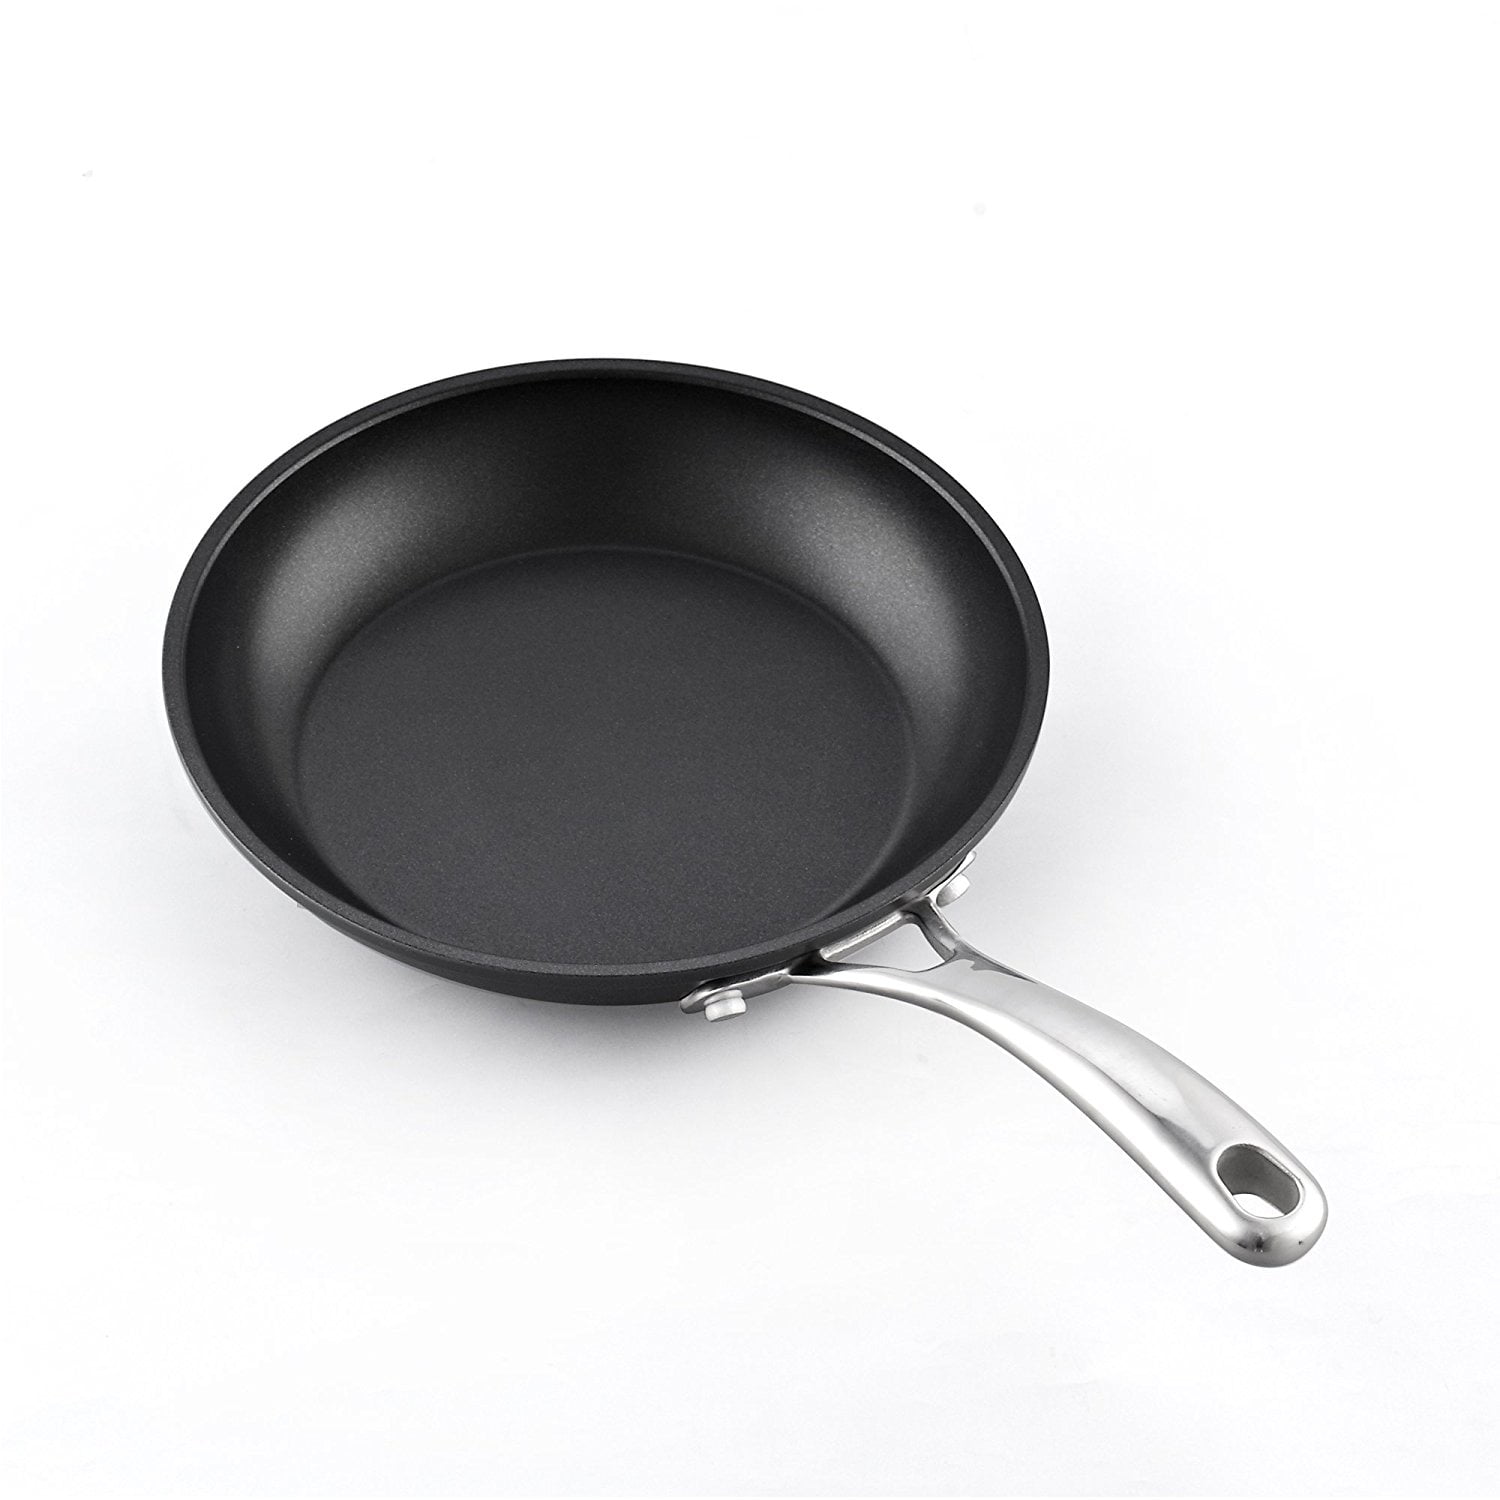 TONKBEEY 7-Hole Cake Cooking Pan Cast Iron Omelette Pan Non-stick